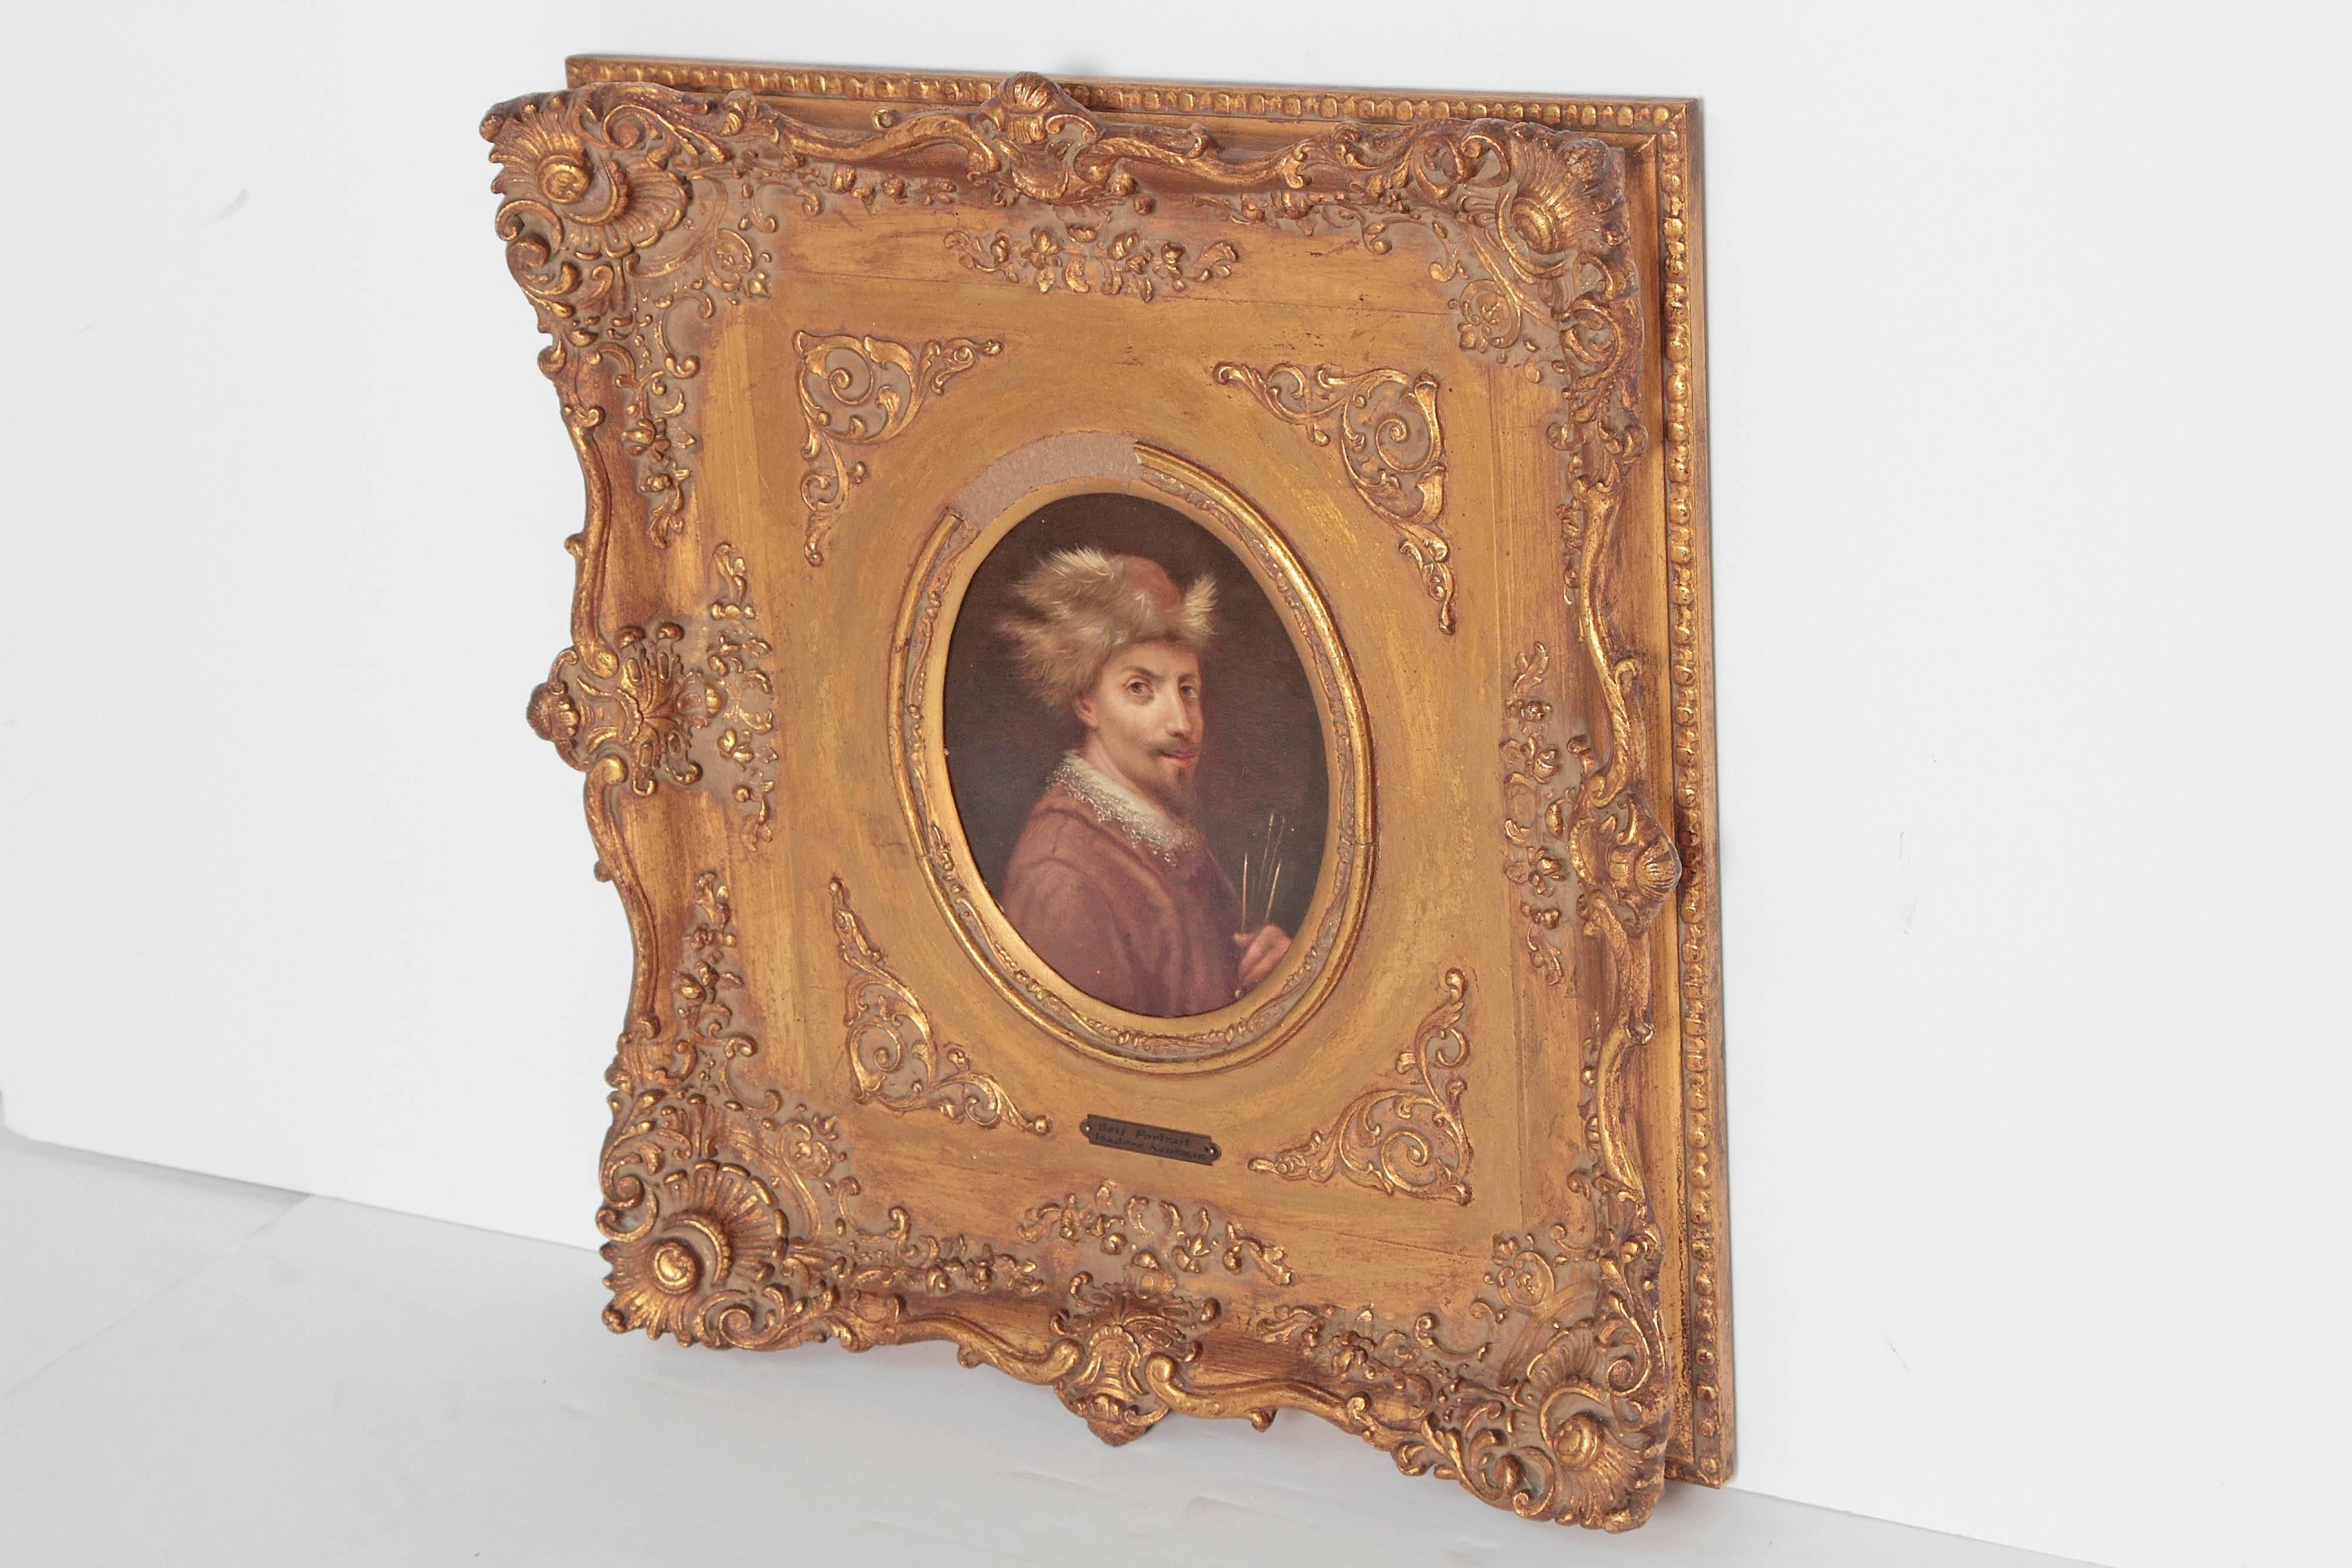 An oil on board self portrait in three quarter pose of a man in fur hat and collar.  Framed in very elaborate decorative carved gilt frame.  Continental school.  Attributed to  Isidor Kaufmann, (1853-1921, Hungarian), but not authenticated. Kaufmann